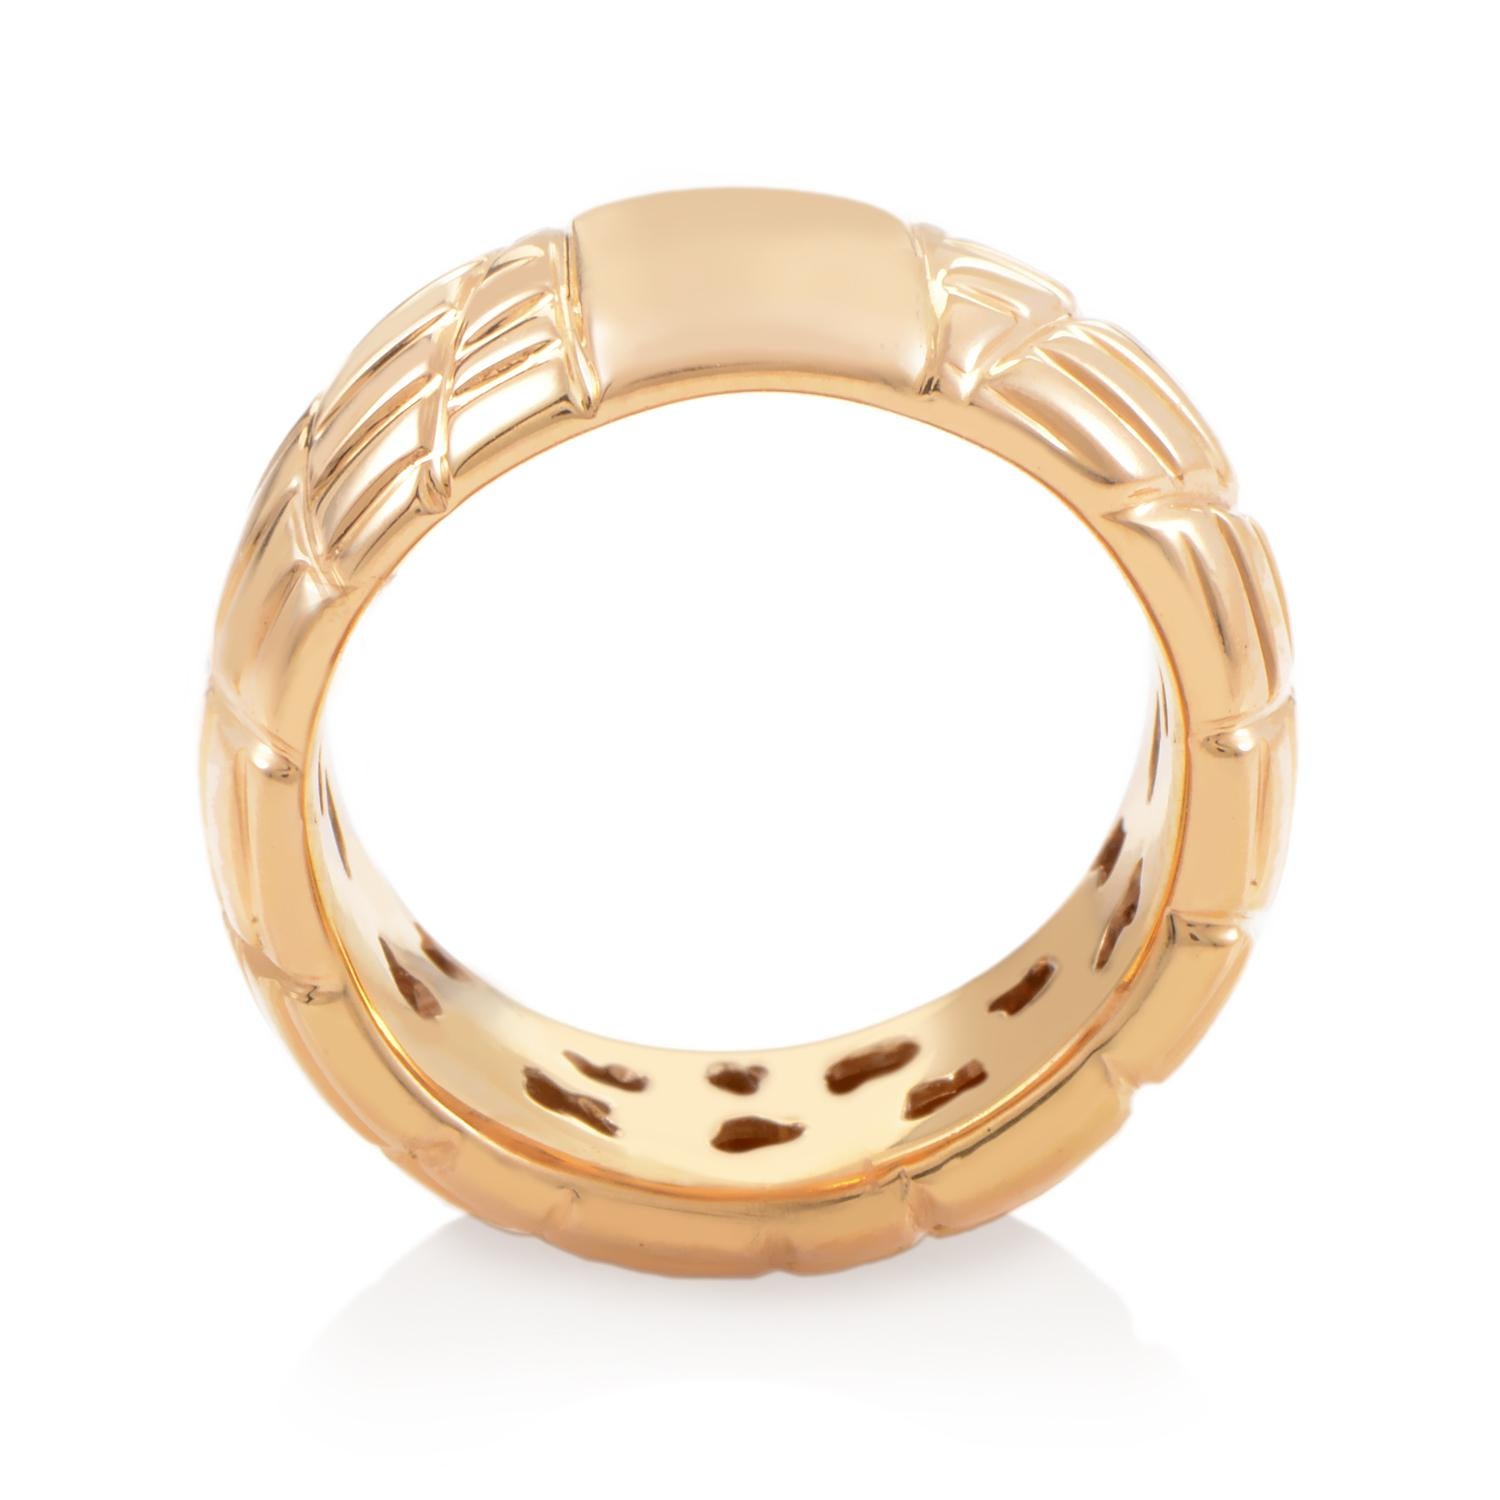 Characterized by its warm, radiant glow, the 18K rose gold gives this Roberto Coin ring enchanting, delightful appearance perfect for any occasion.
